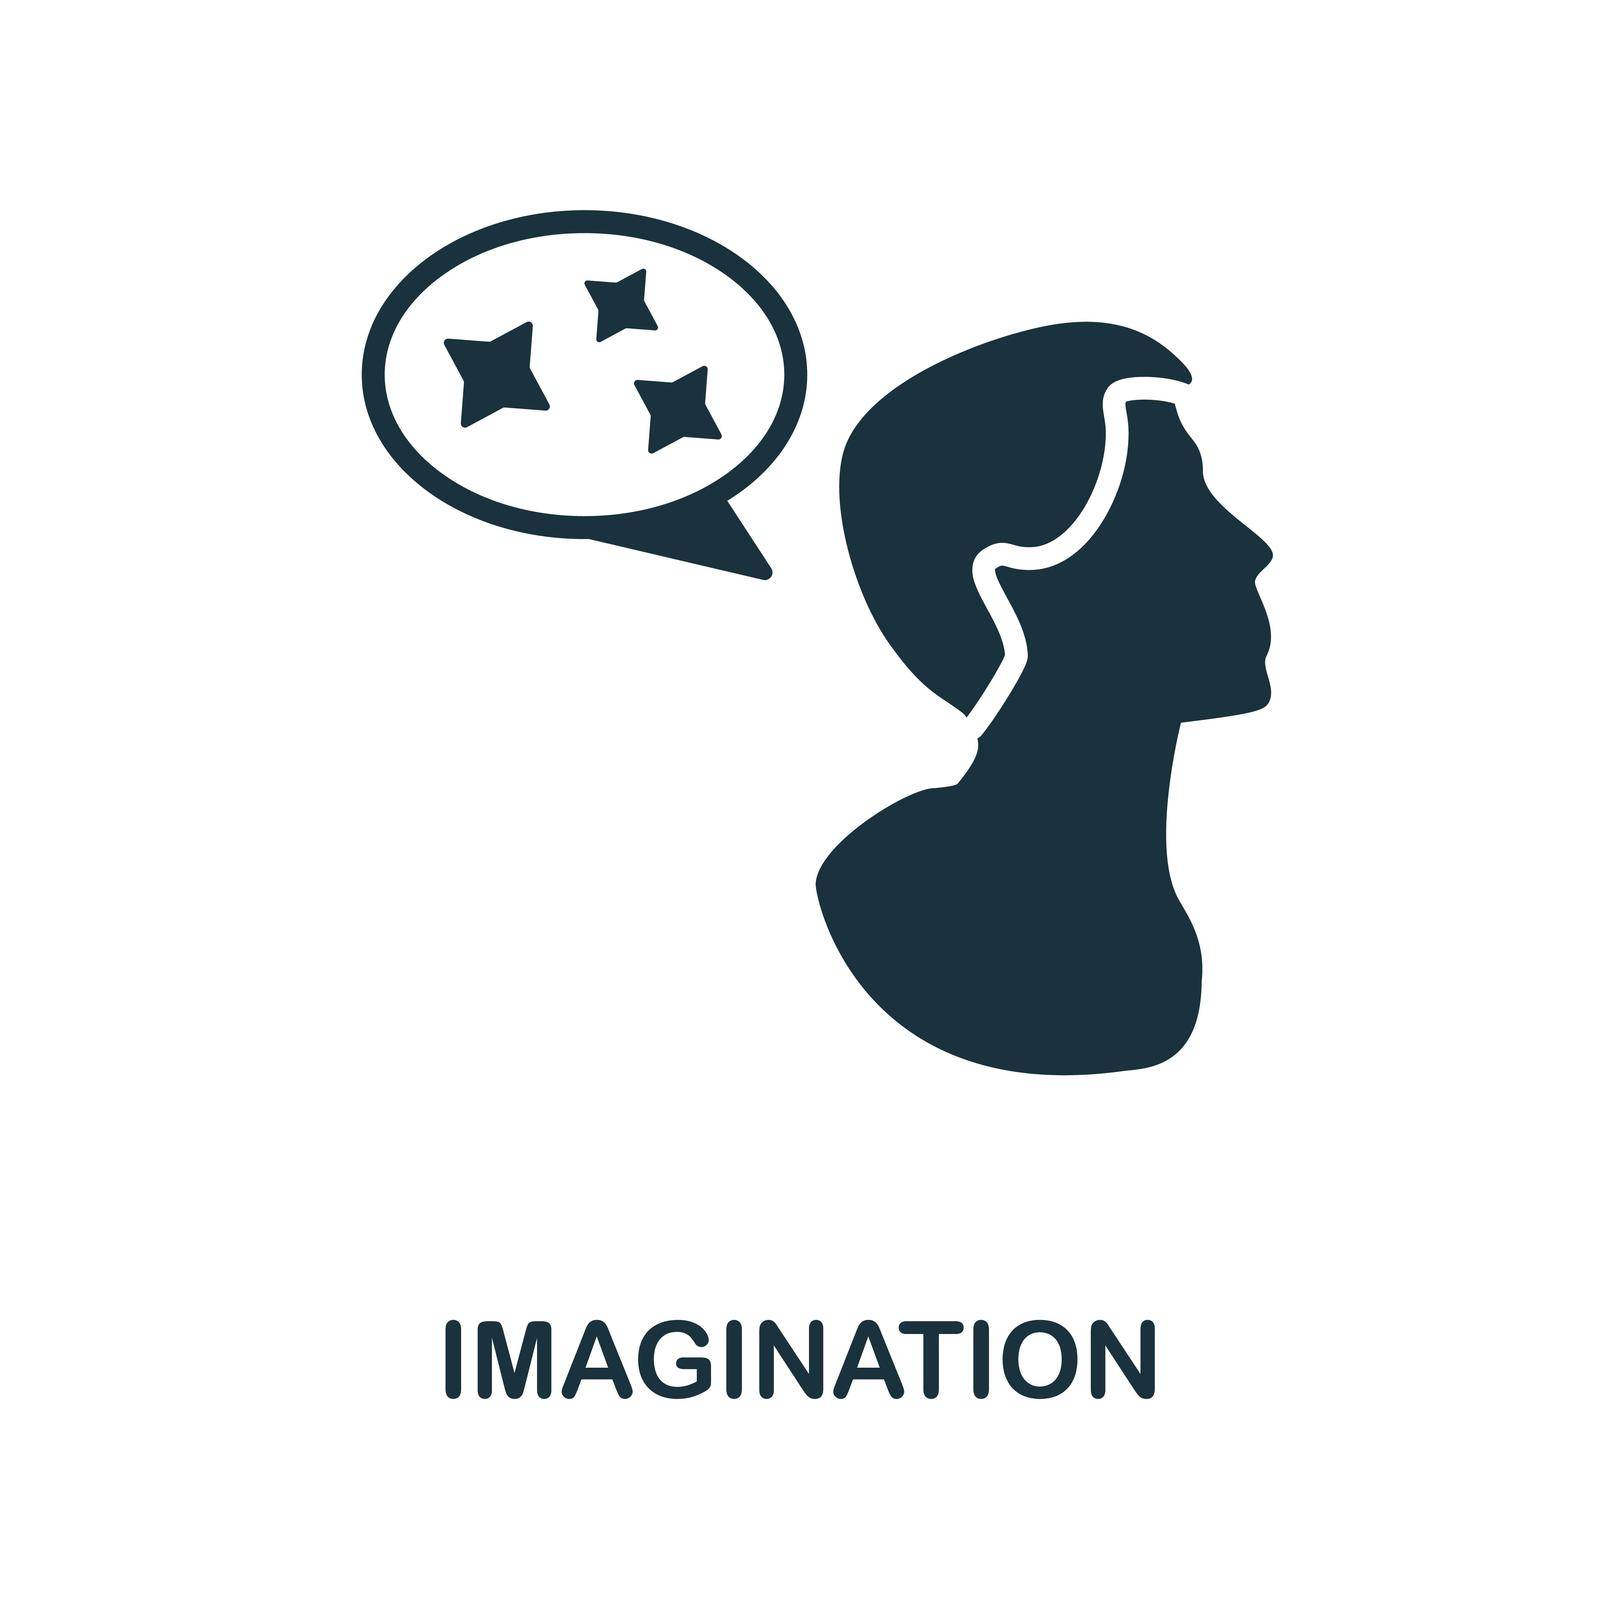 Imagination icon. Black sign from creative learning collection. Creative Imagination icon for web design, templates and infographics.